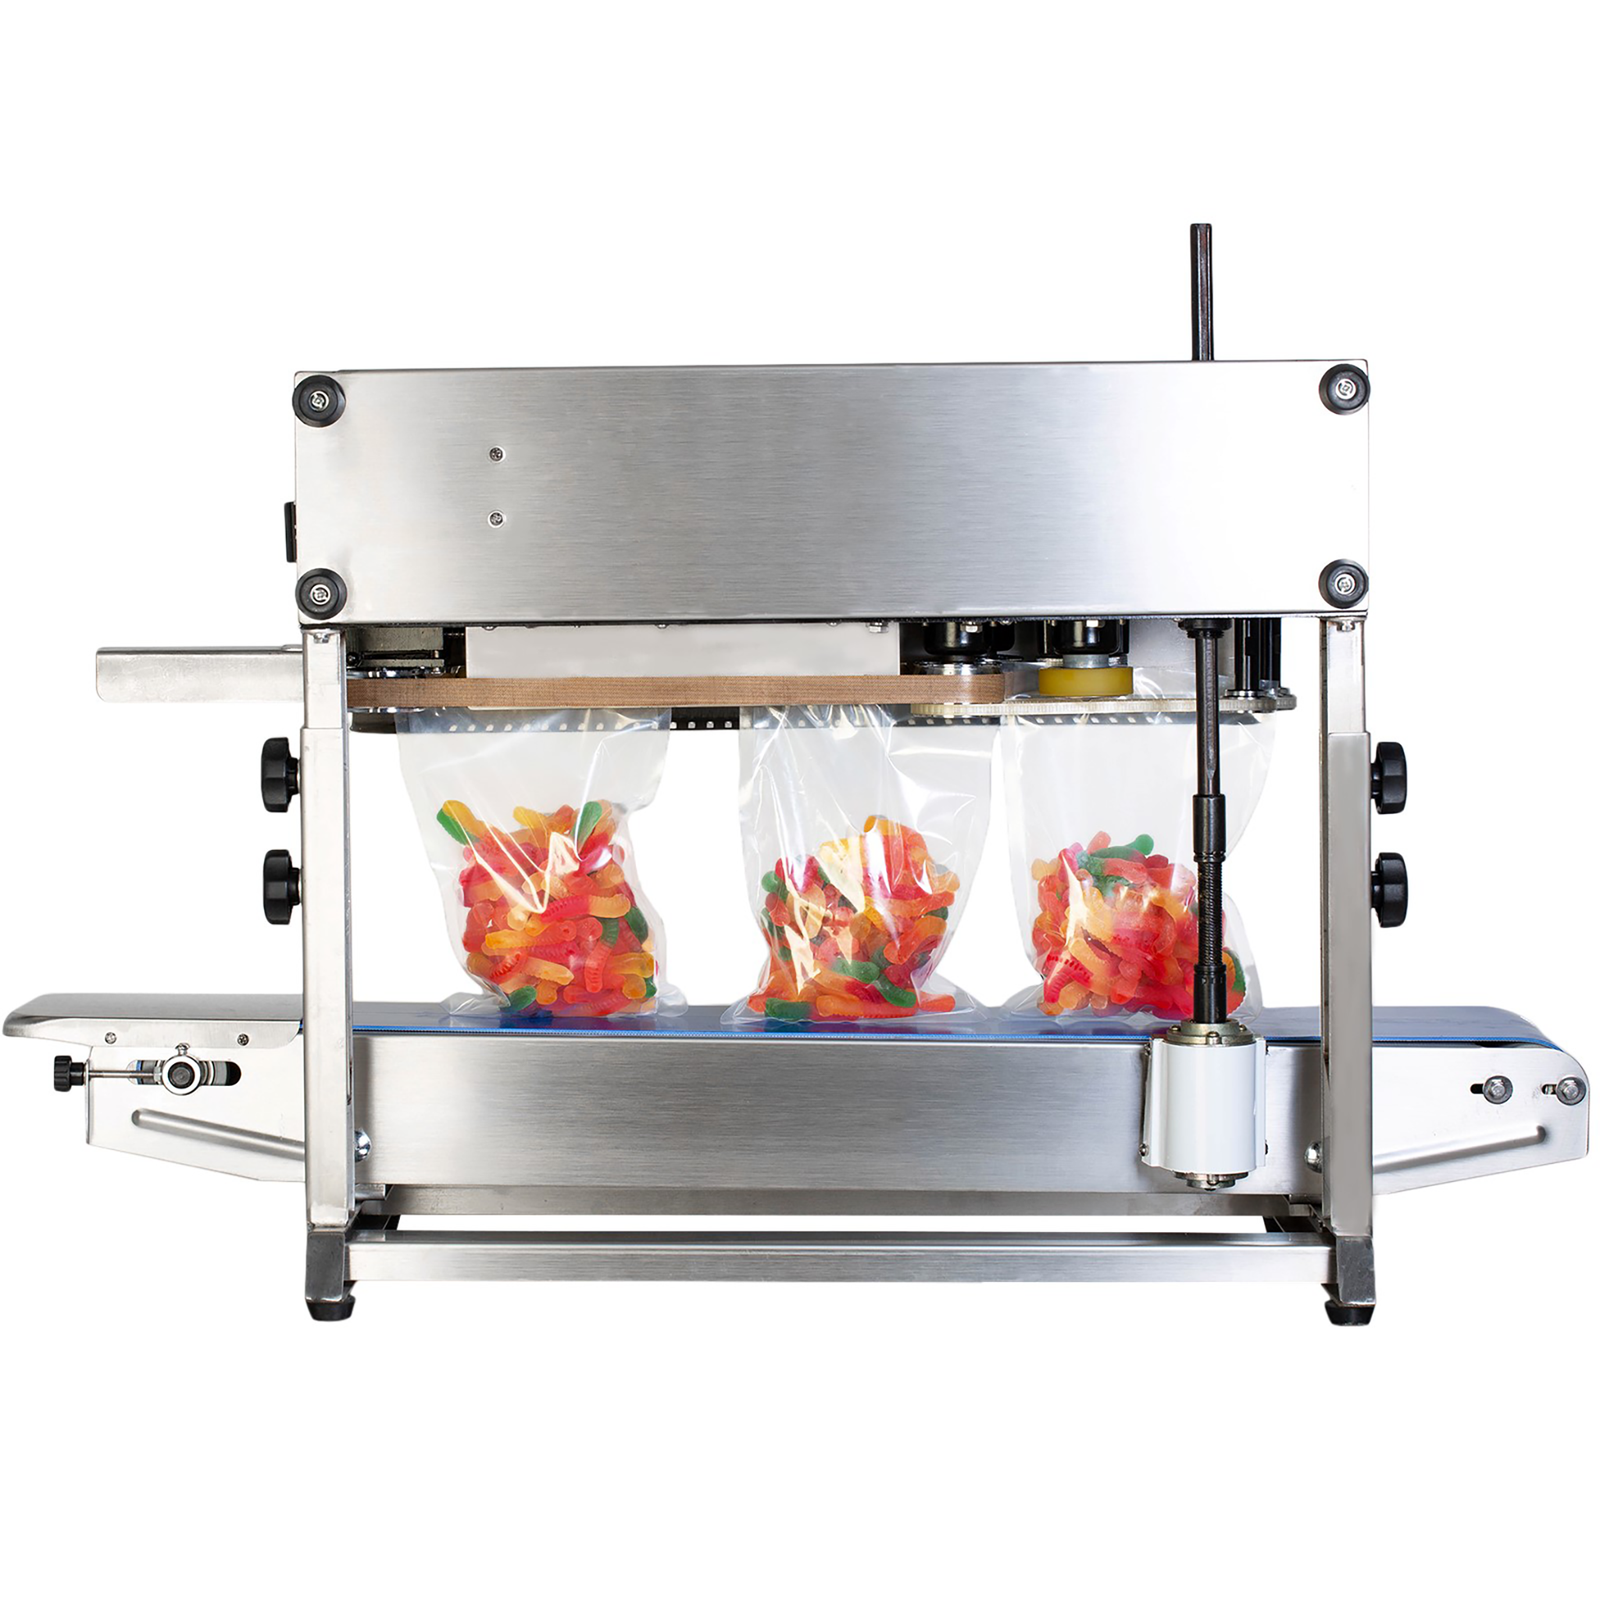 stainless steel bag sealing machine for 220v sealing clear bags filled with vibrant multi-colored gummy worms.